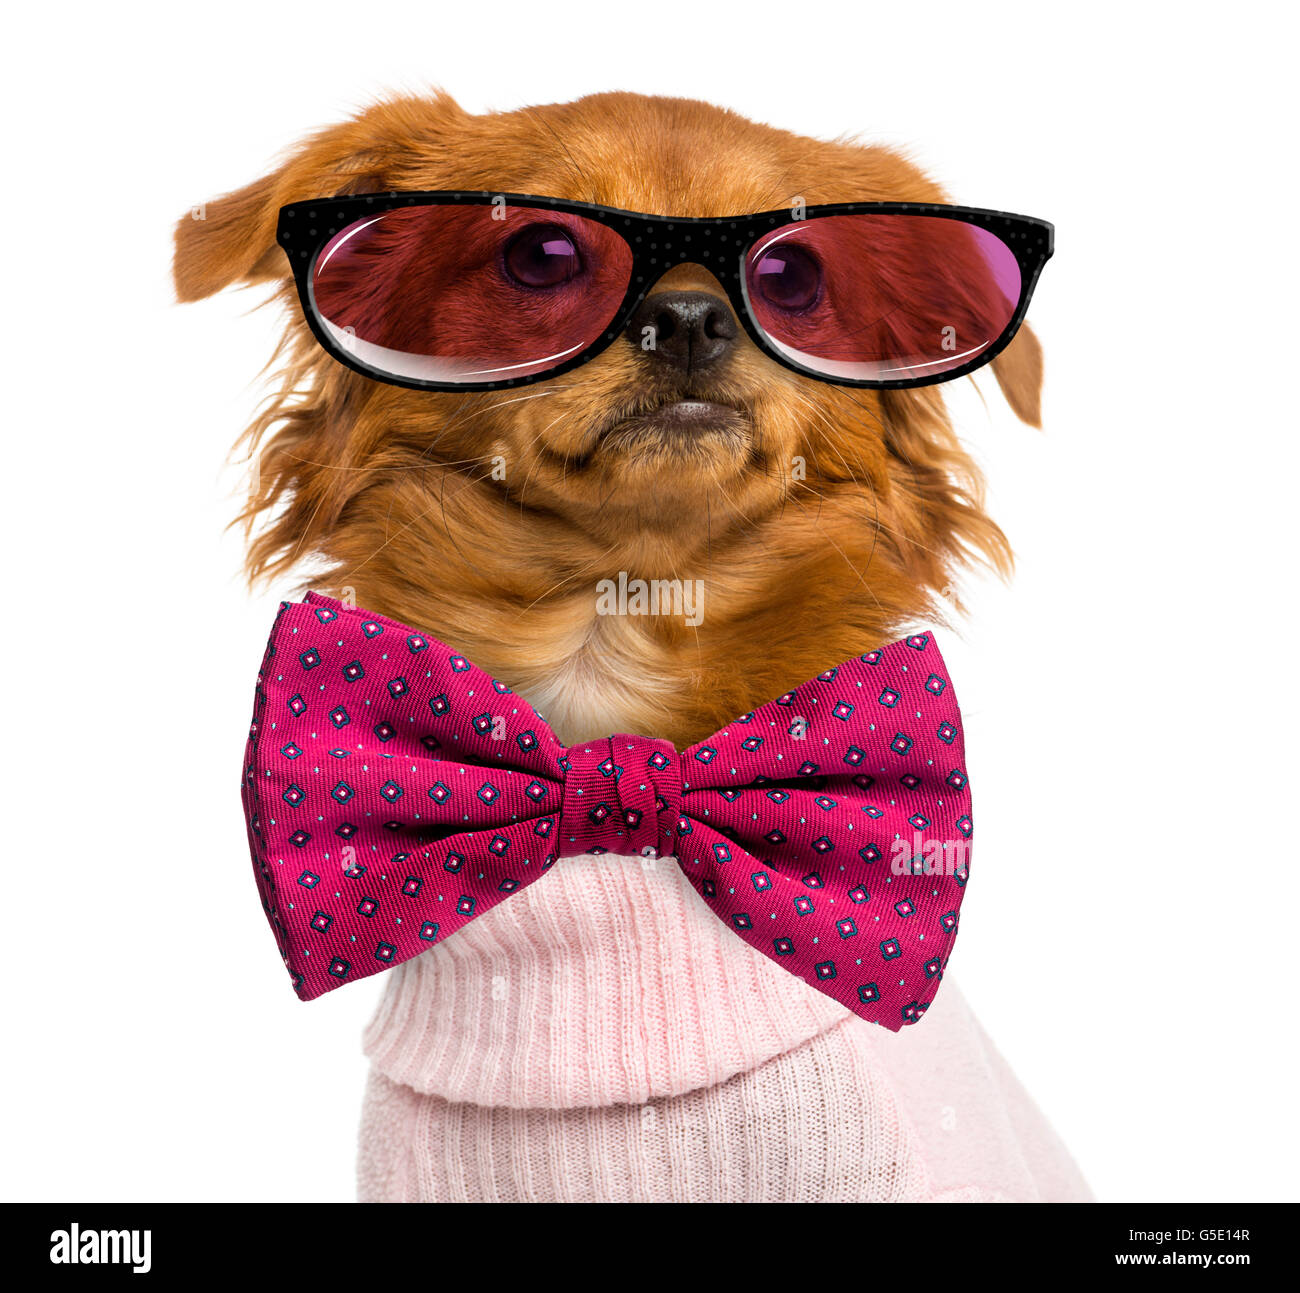 Close-up of a Dressed-up Mixed-breed Chihuahua wearing glasses and a bow tie, isolated on white Stock Photo